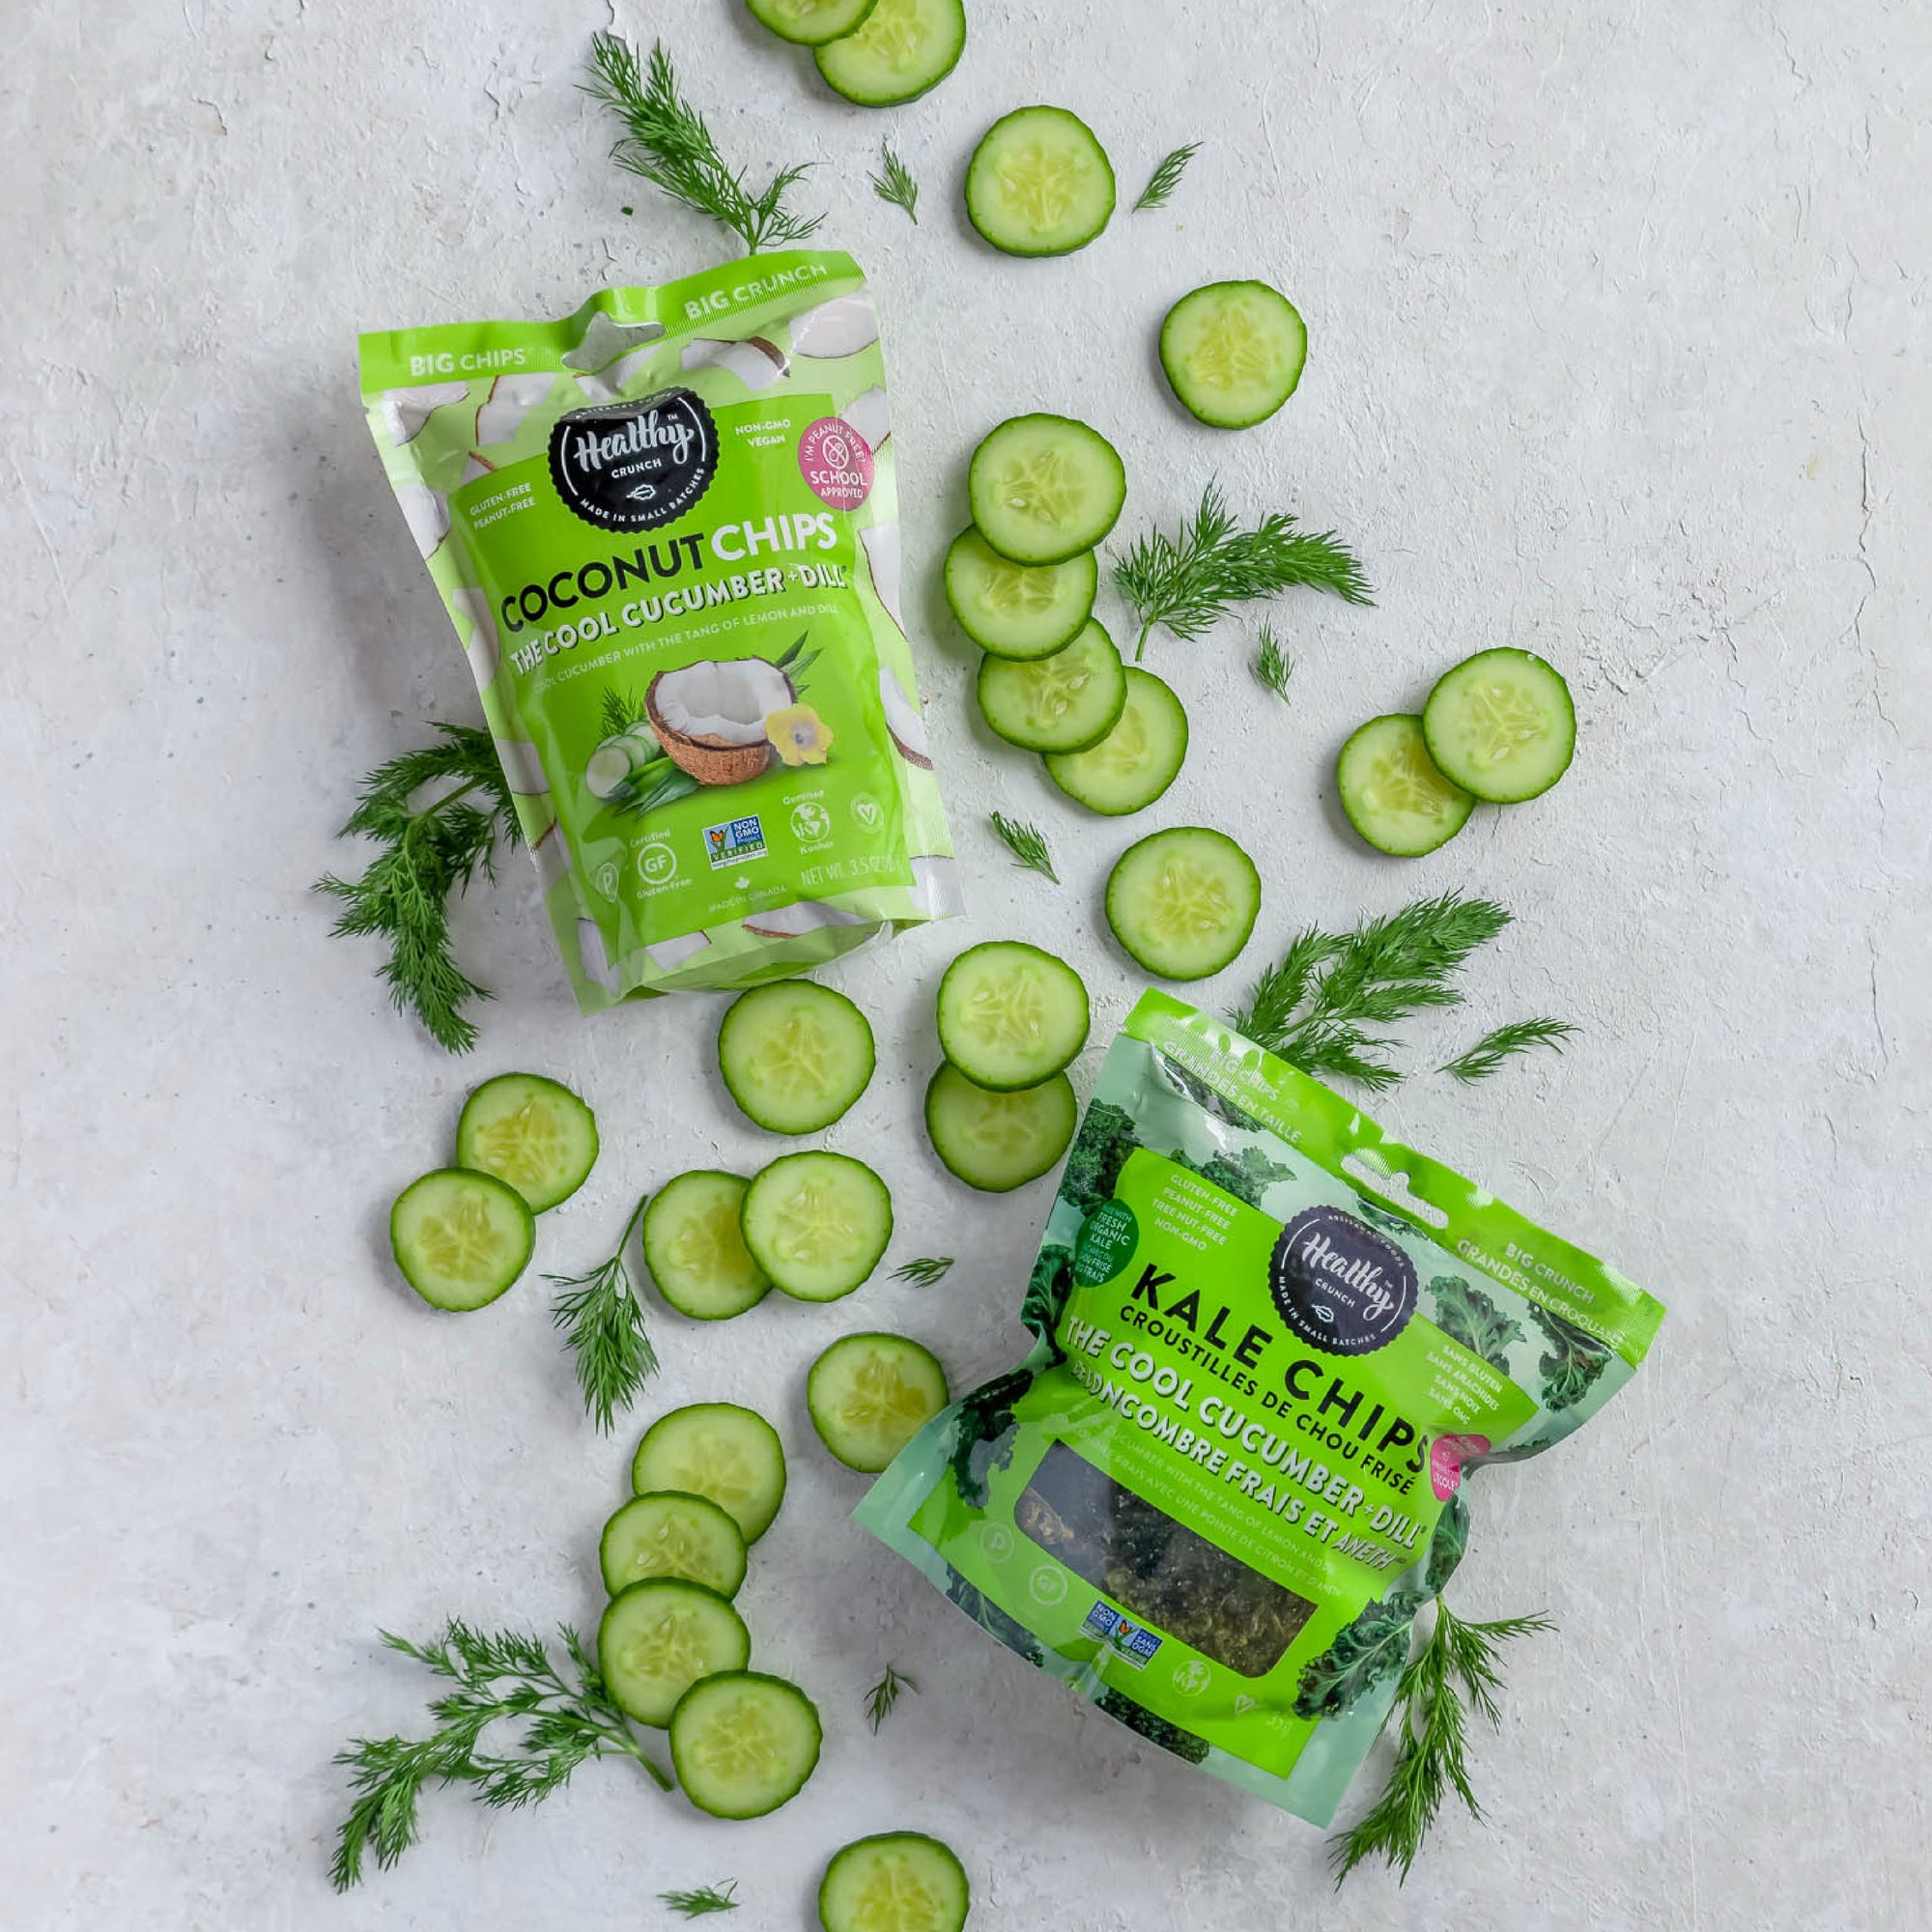 The Cool Cucumber + Dill Coconut Chips